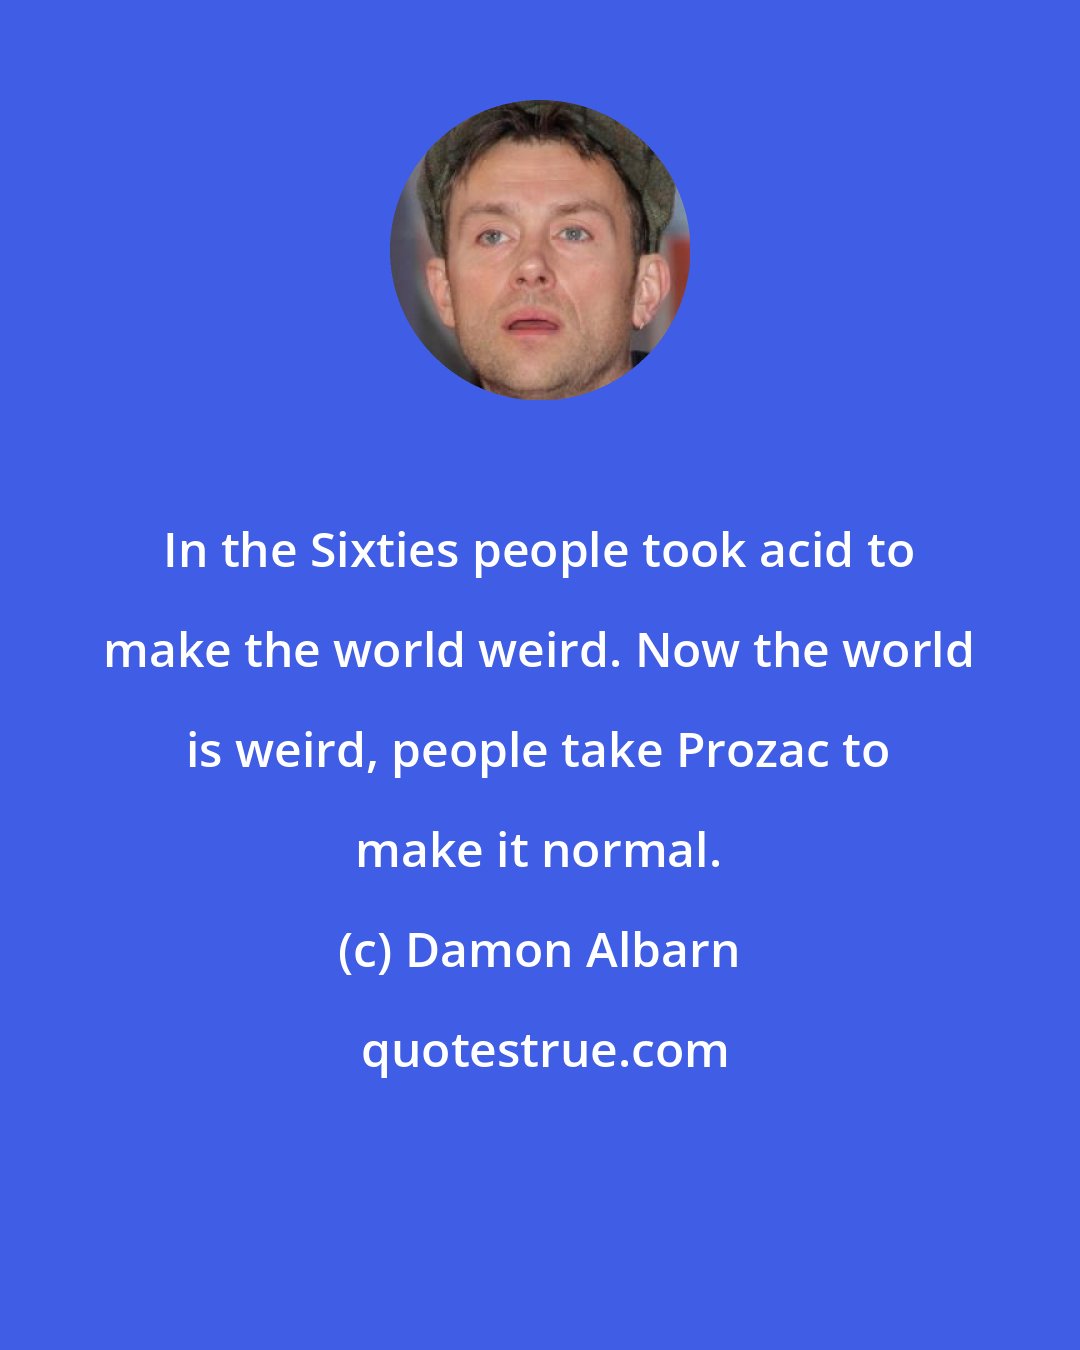 Damon Albarn: In the Sixties people took acid to make the world weird. Now the world is weird, people take Prozac to make it normal.